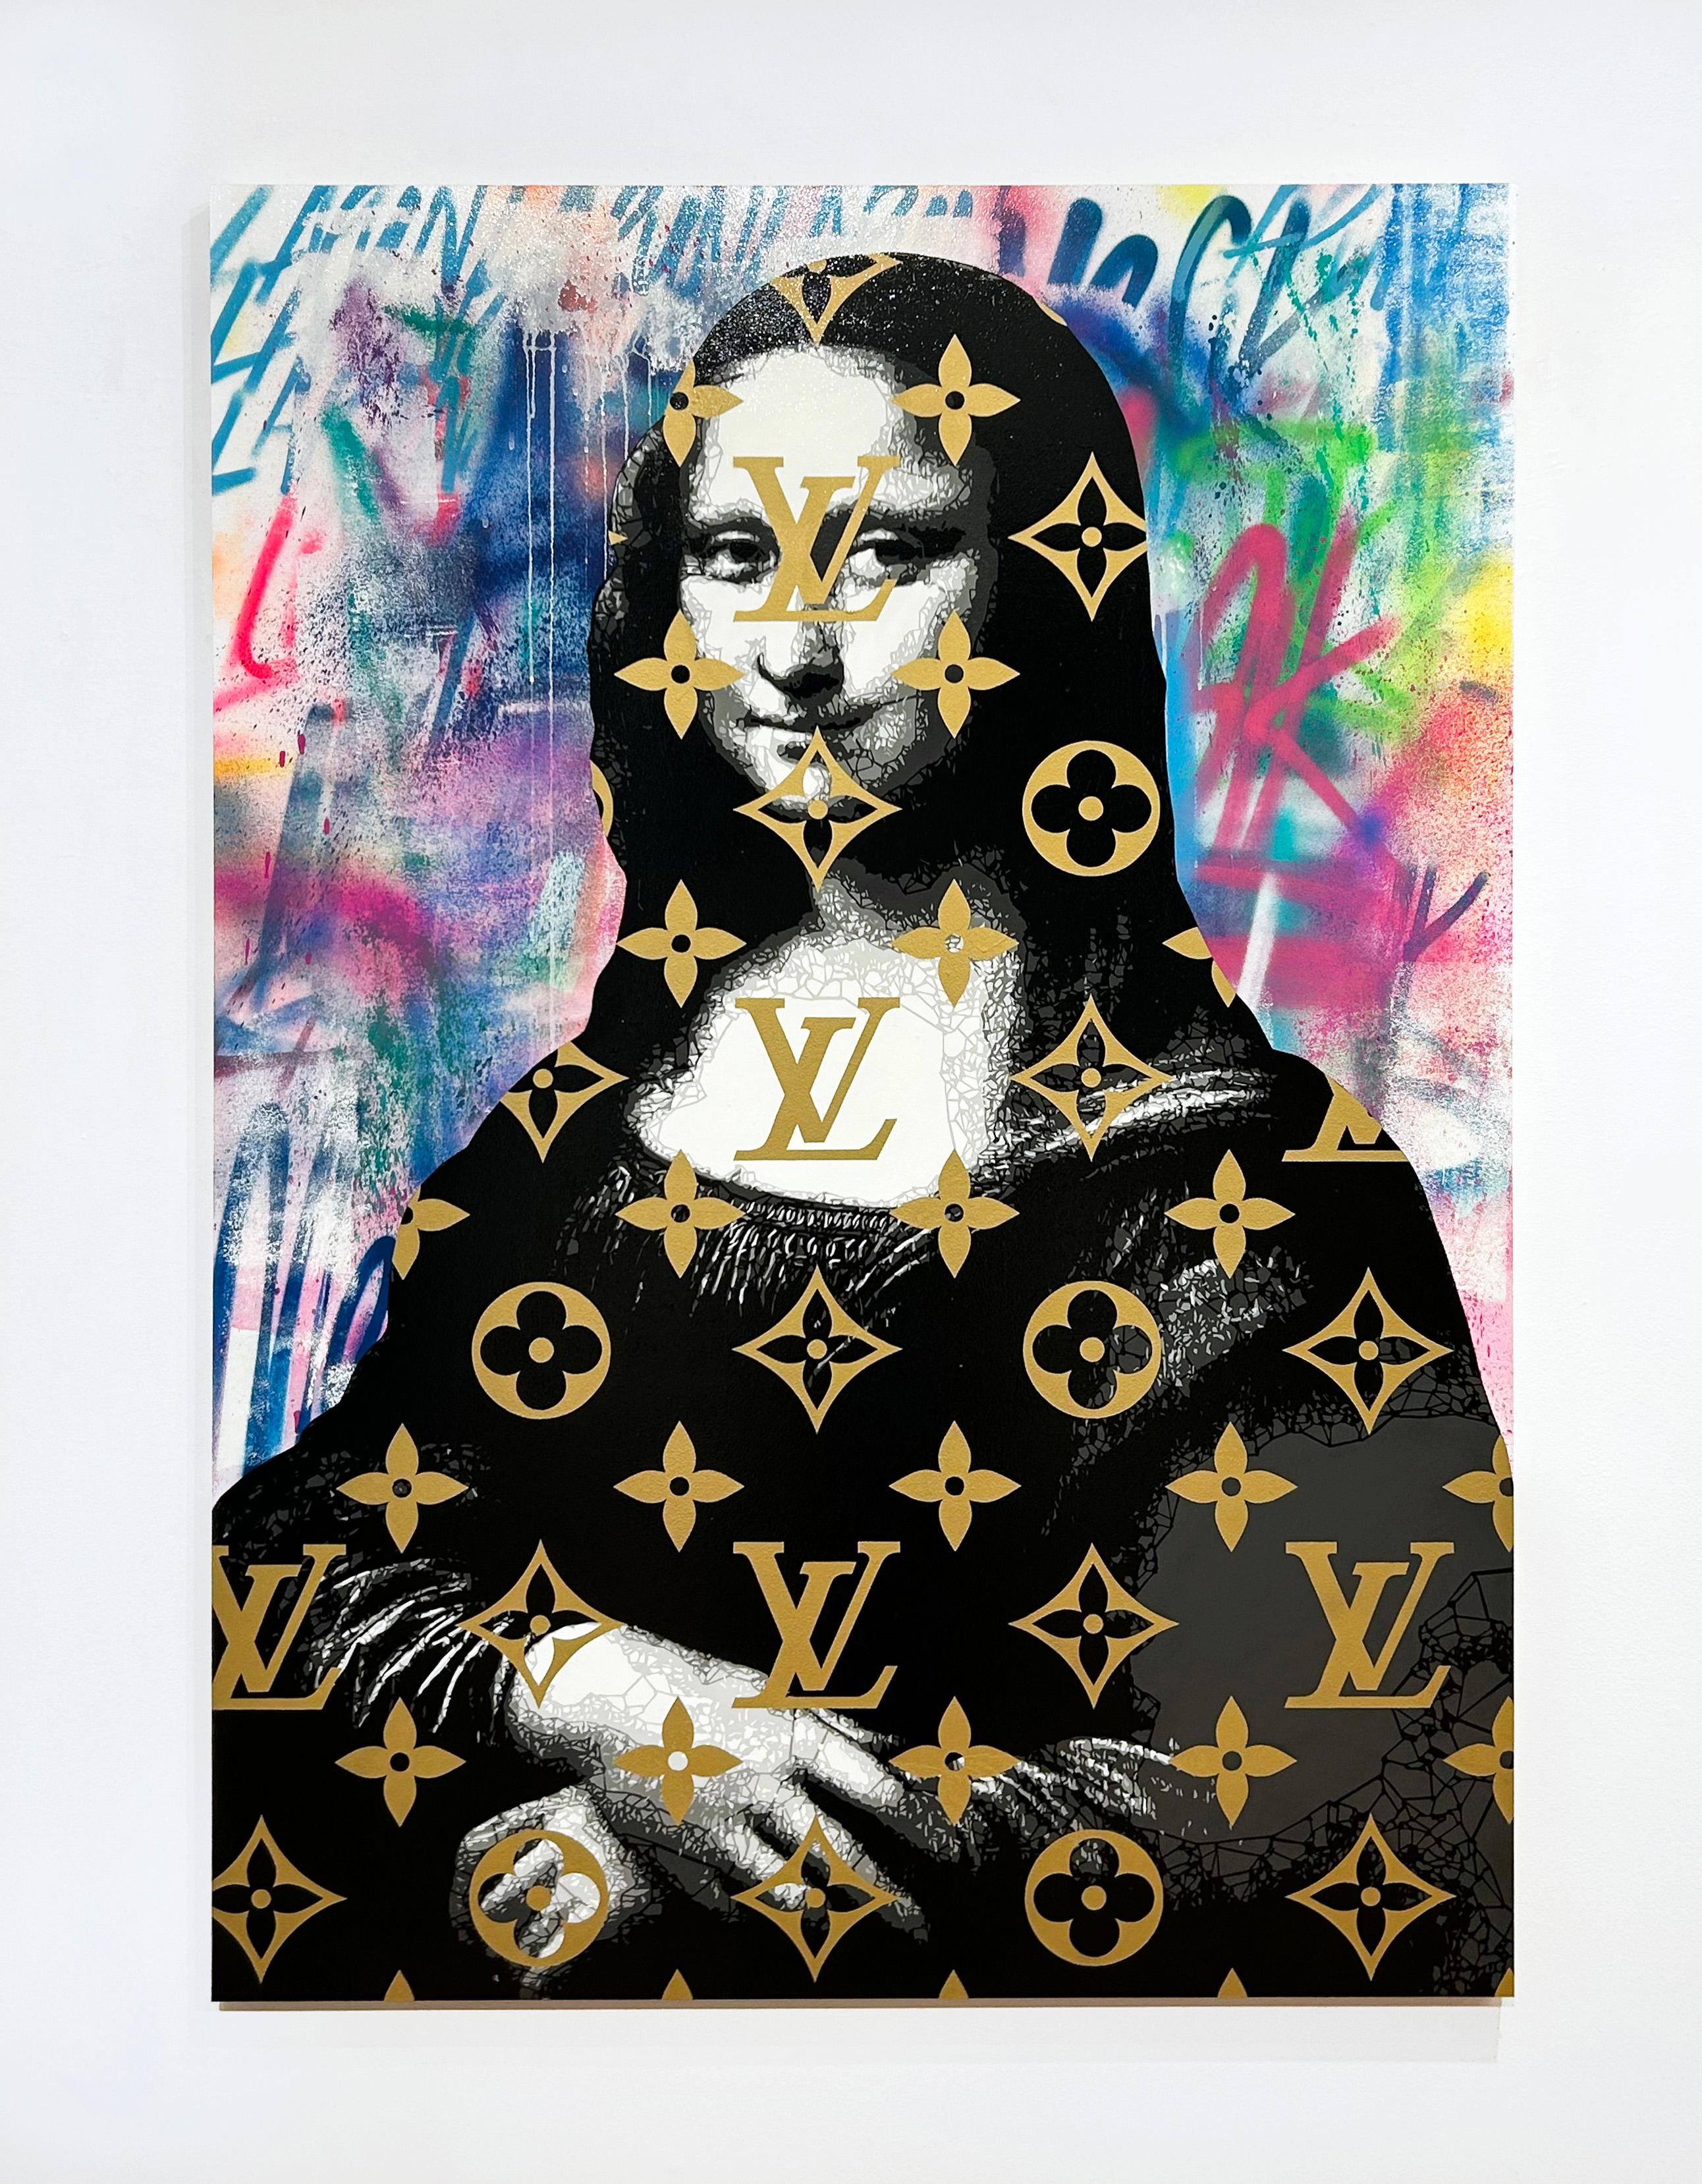 LV Mona Lisa - Mesik - Contemporary Painting by Campbell la Pun